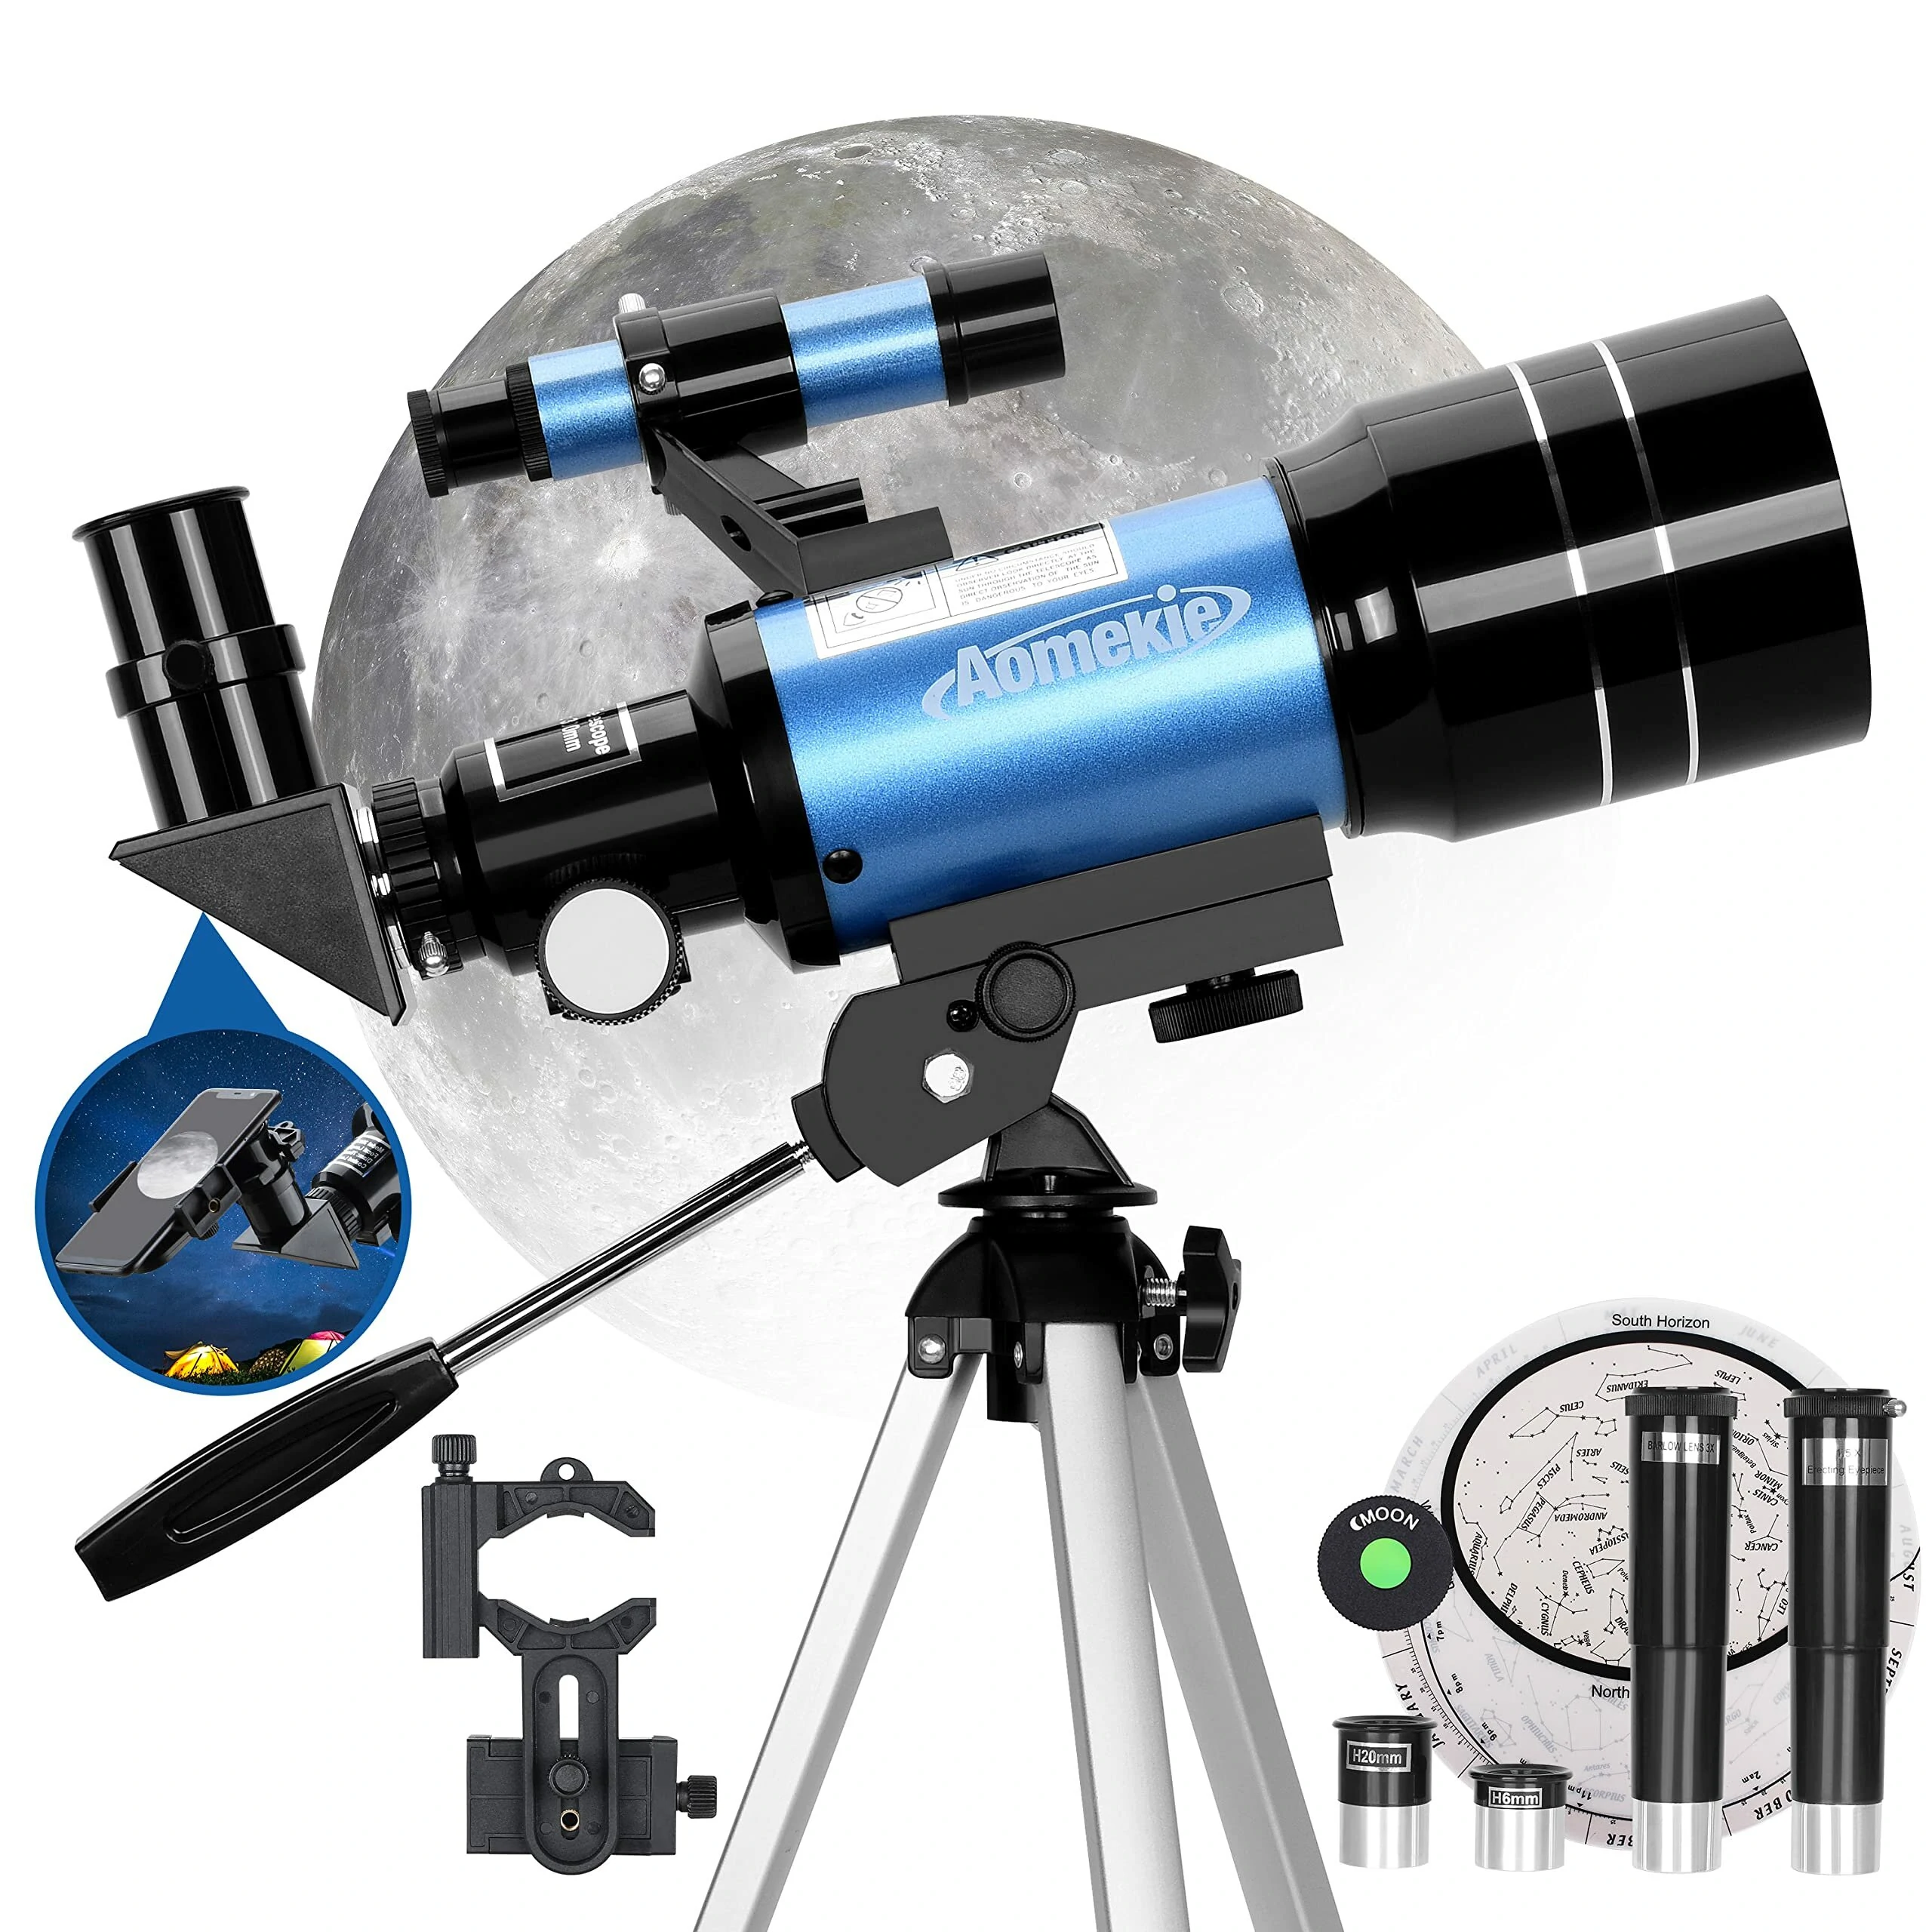 [EU Direct] AOMEKIE AO2001 Astronomical Telescope 70mm for Kids 150X Powerful Astronomical Telescope with Smartphone Adapter Tripod Barlow Lens and Finder for Beginners and Hobbyists